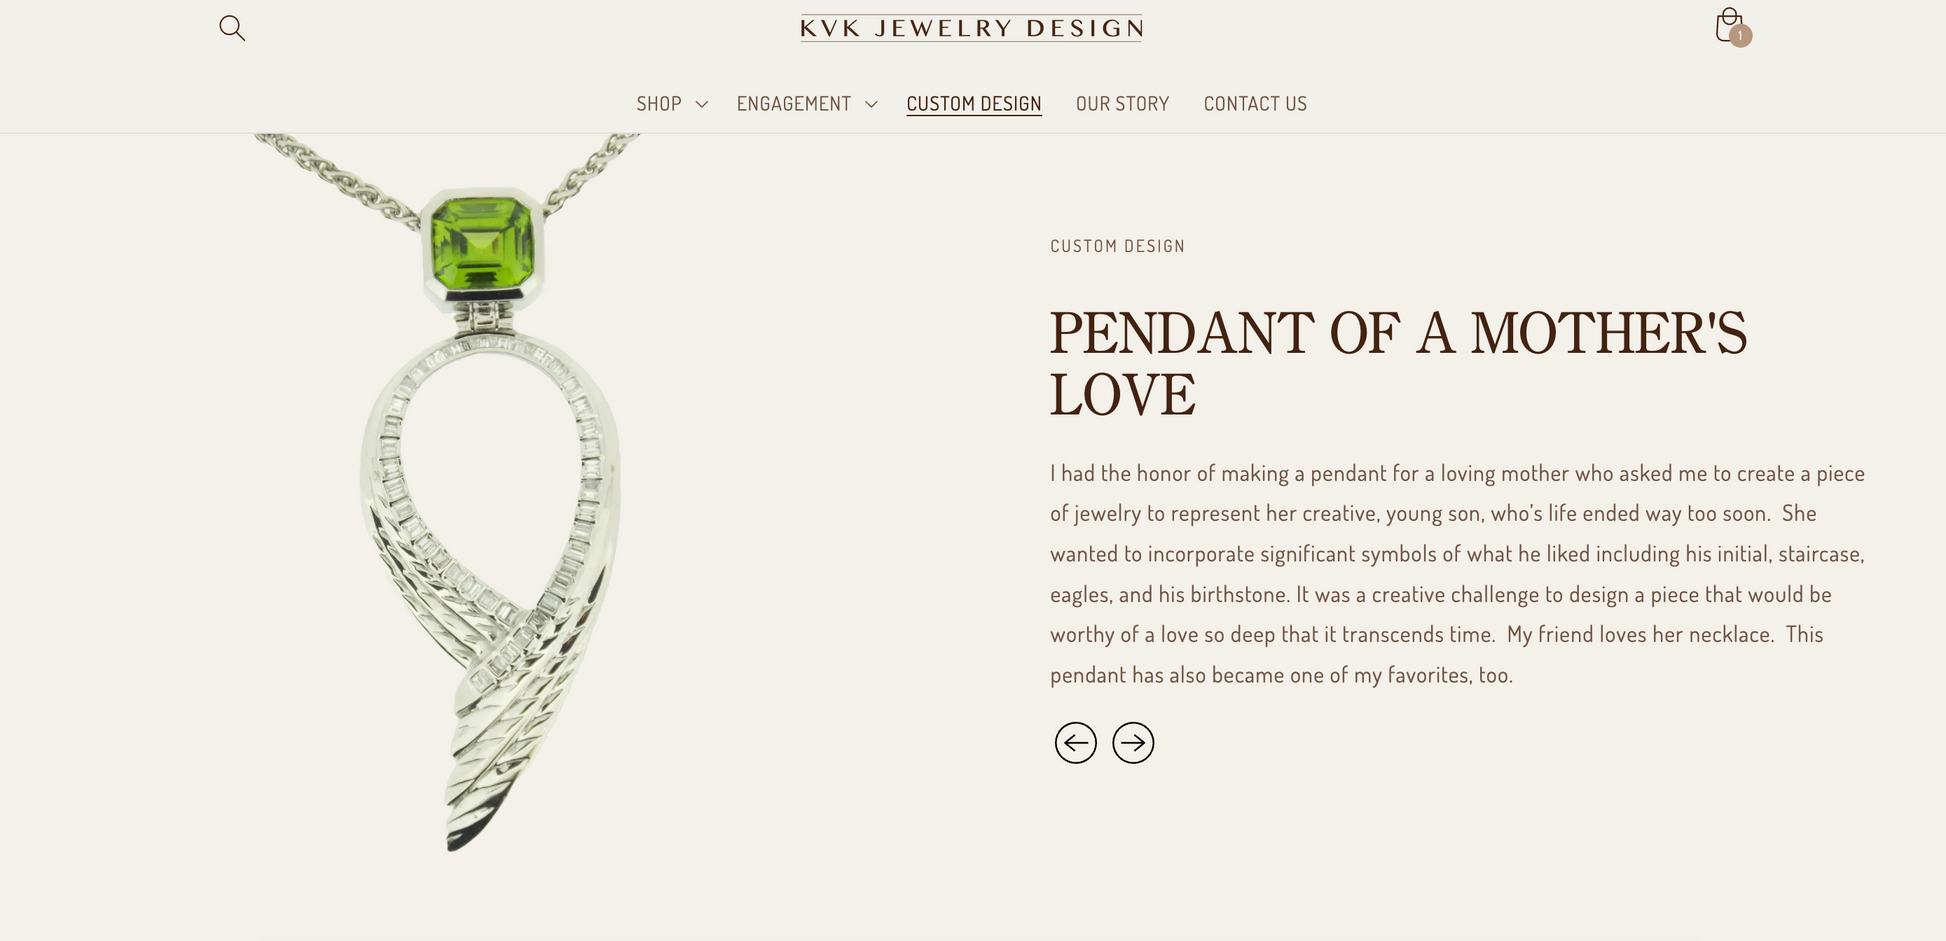 Custom jewelry Pendant of a mother's love featured product for KVK Jewelry Design-a website designed by 29TH DESIGN